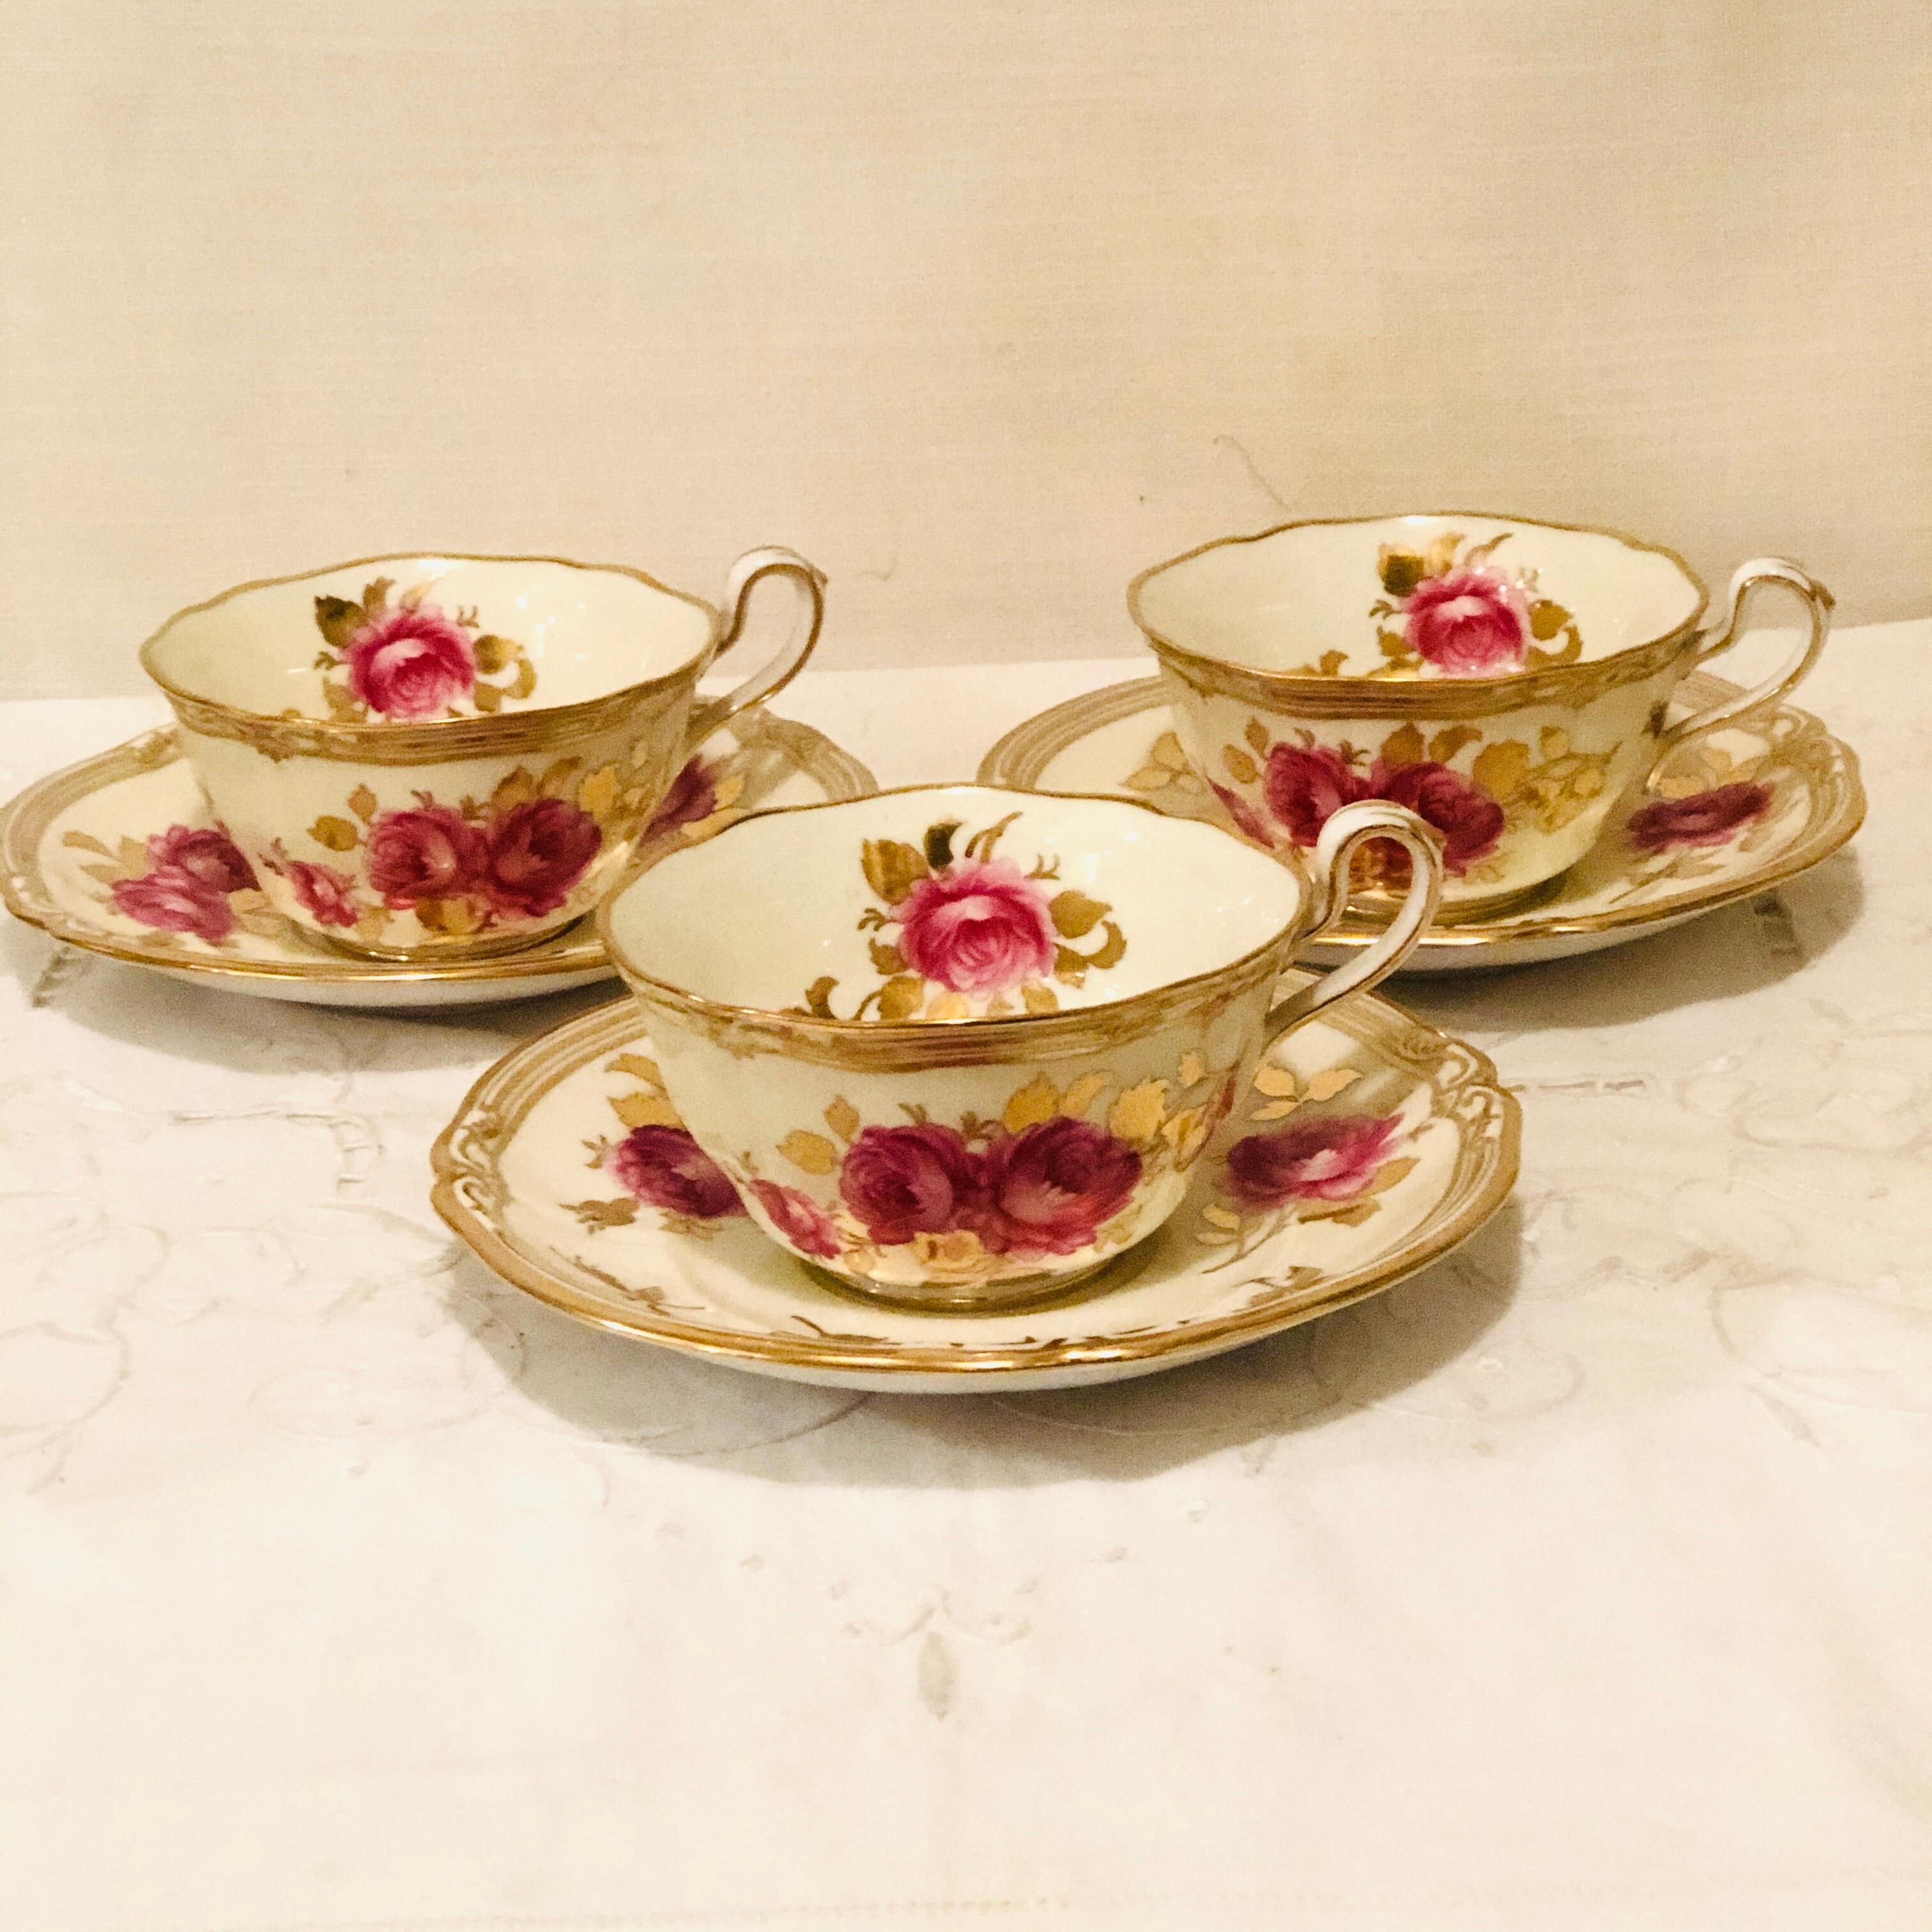 Spode Made for Tiffany 66 Piece Dinner Service Decorated with Large Pink Roses 4